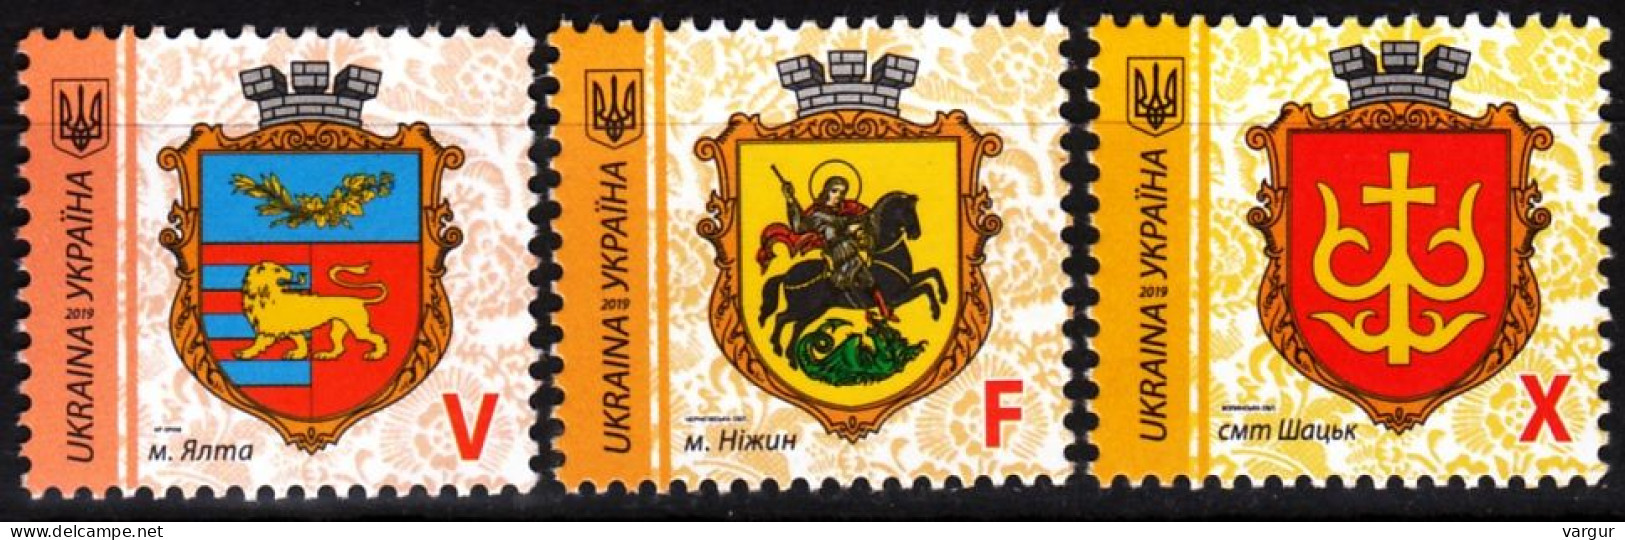 UKRAINE 2019-13 Definitive: Heraldry City Arms, 3v. Re-printing. Issues 1 & 2, MNH - Stamps